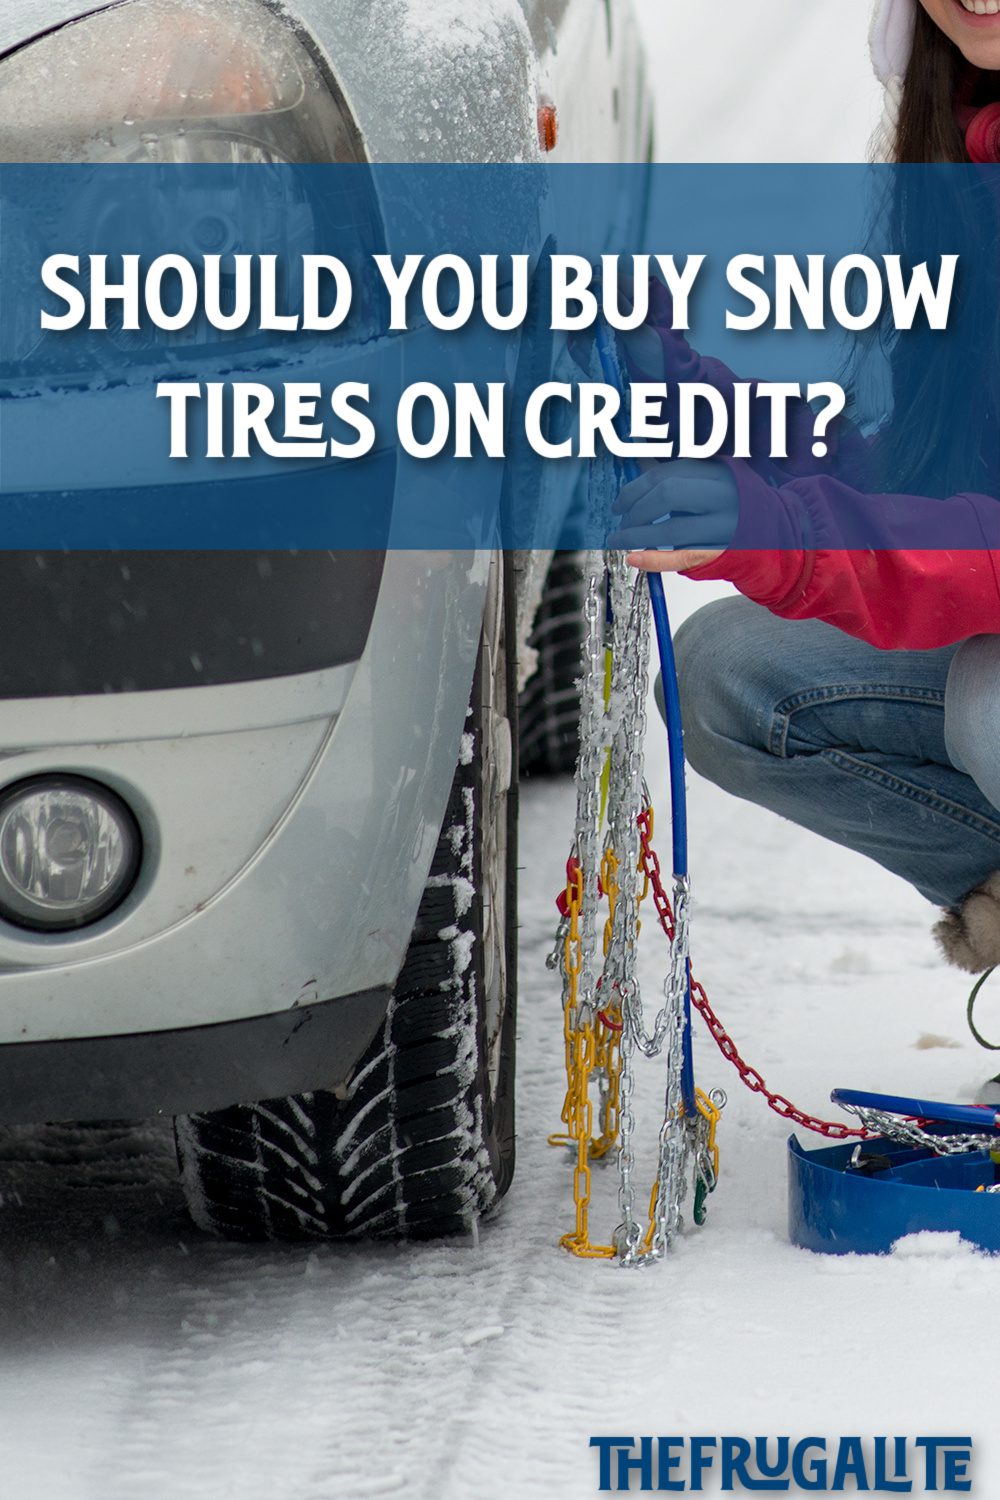 Should You Buy Snow Tires on Credit?